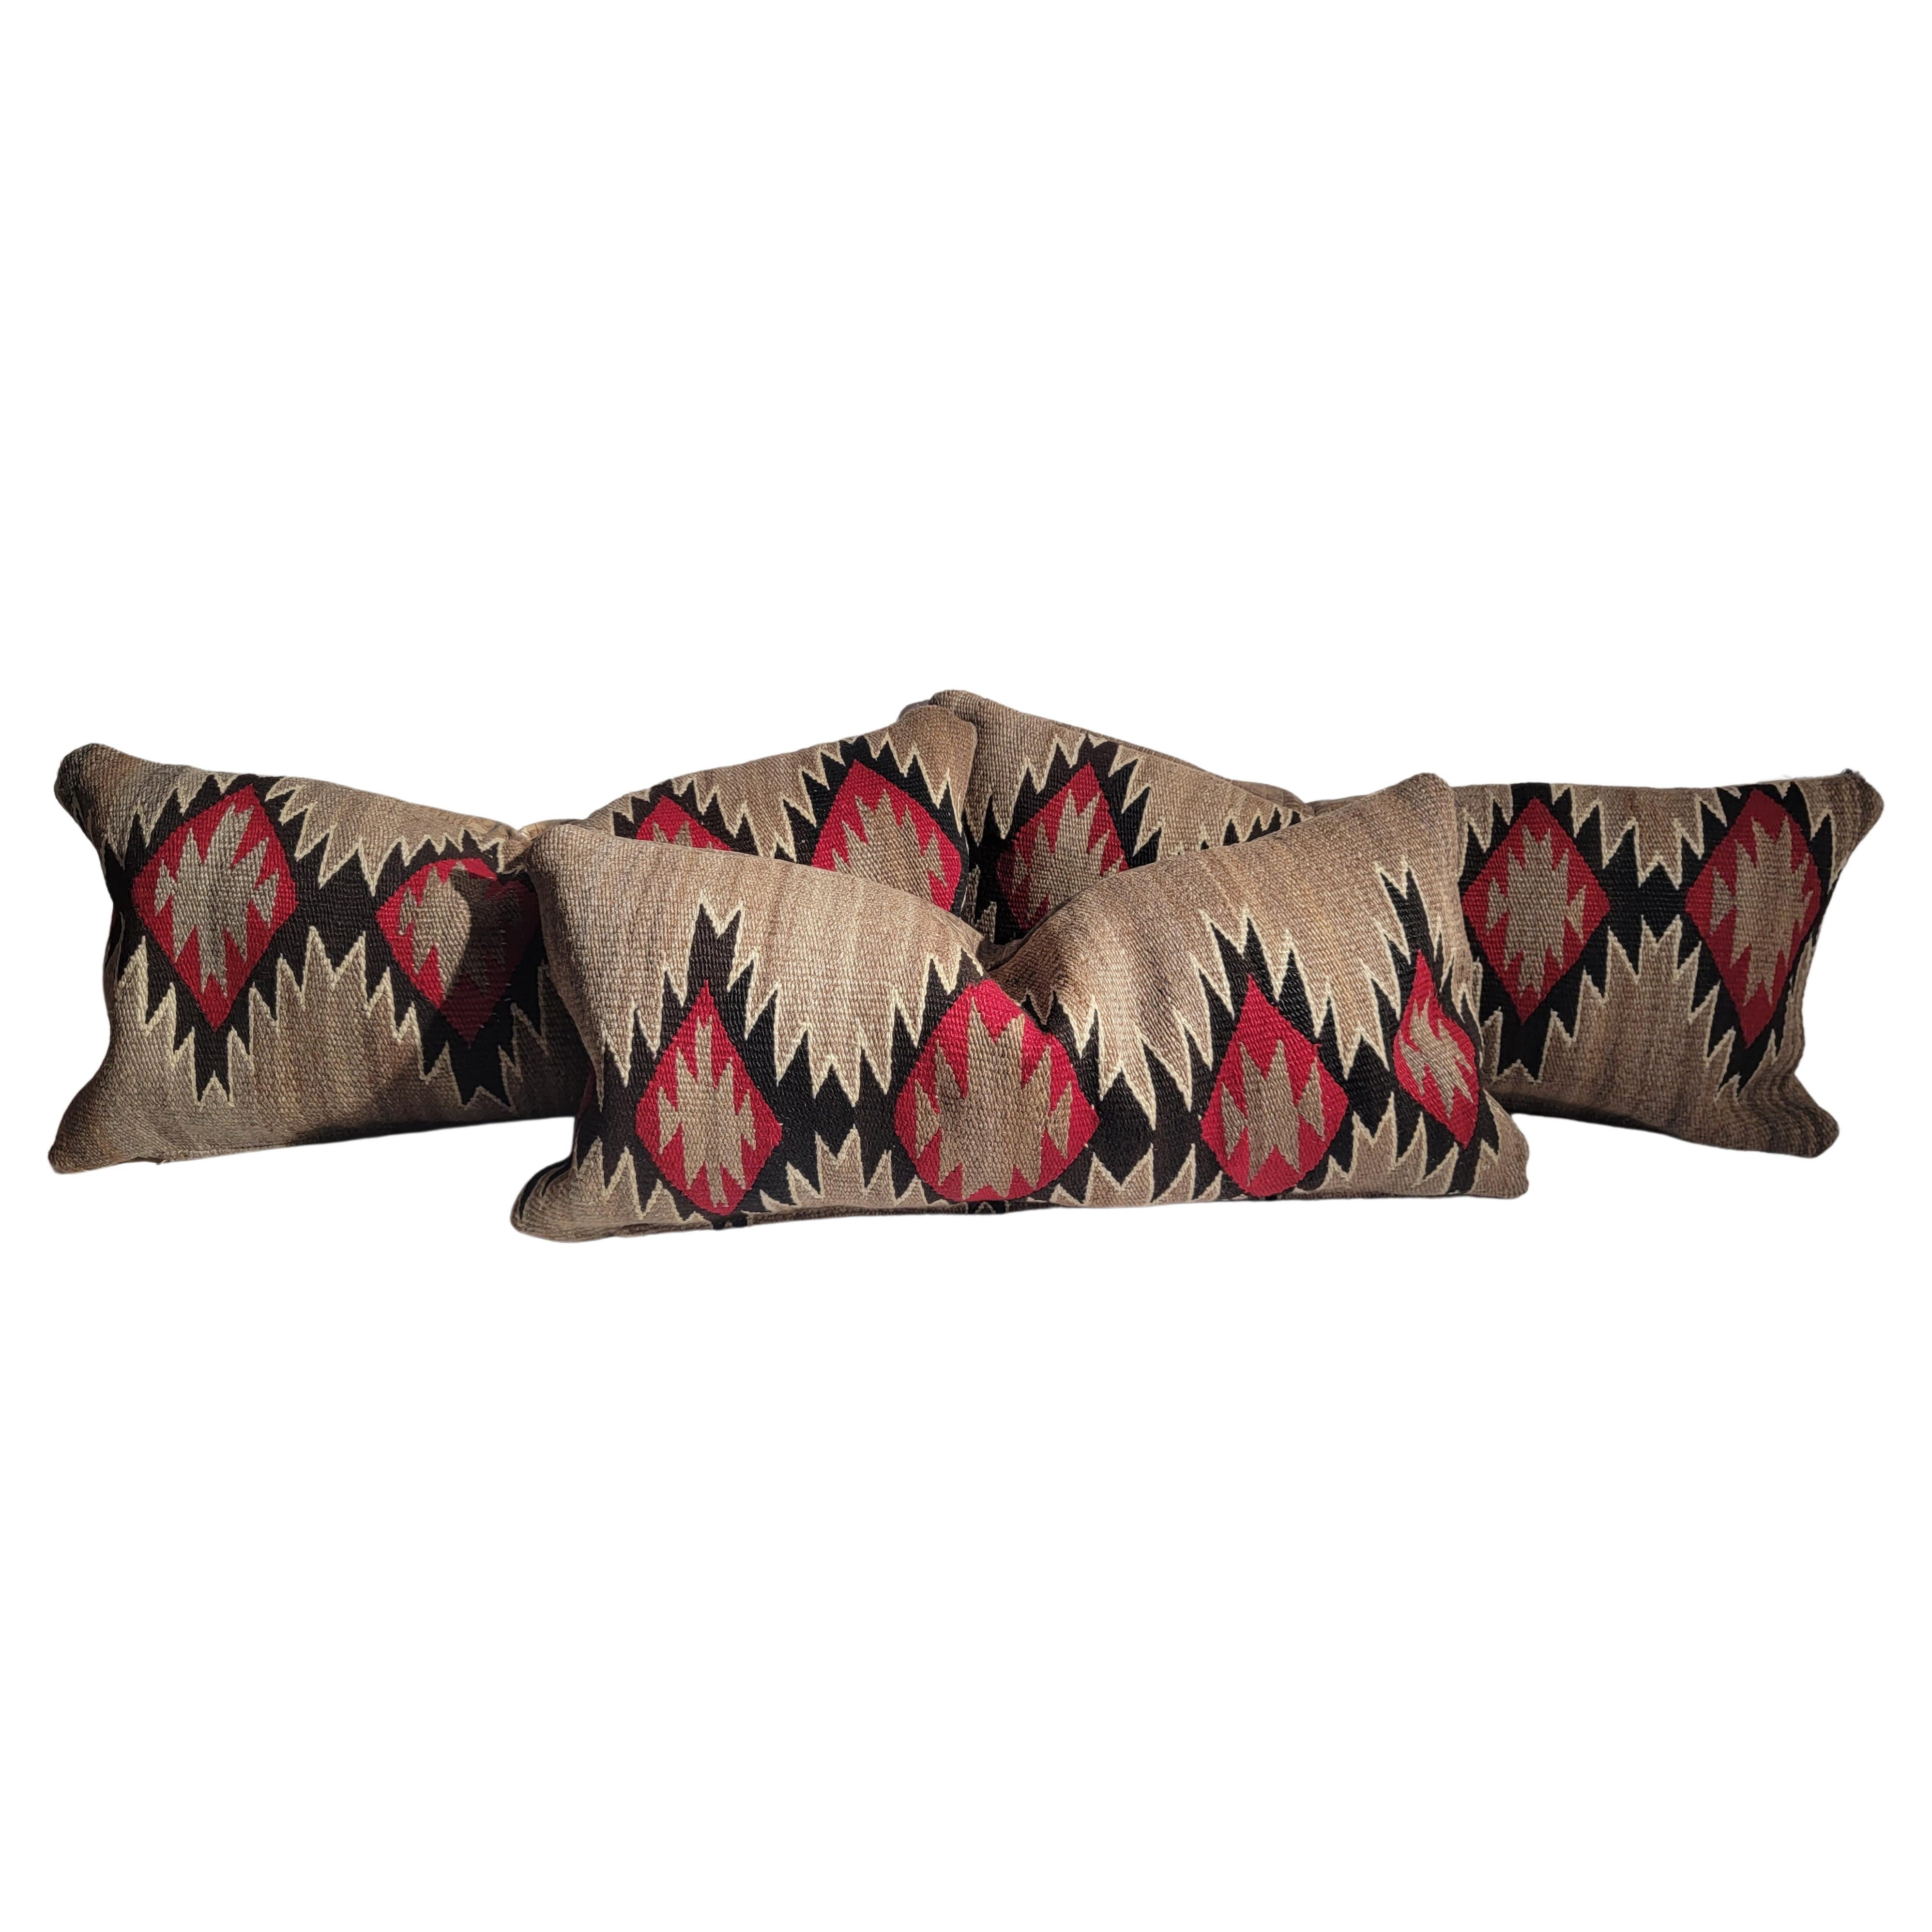 Navajo Indian Weaving Bolster Pillow -3 For Sale